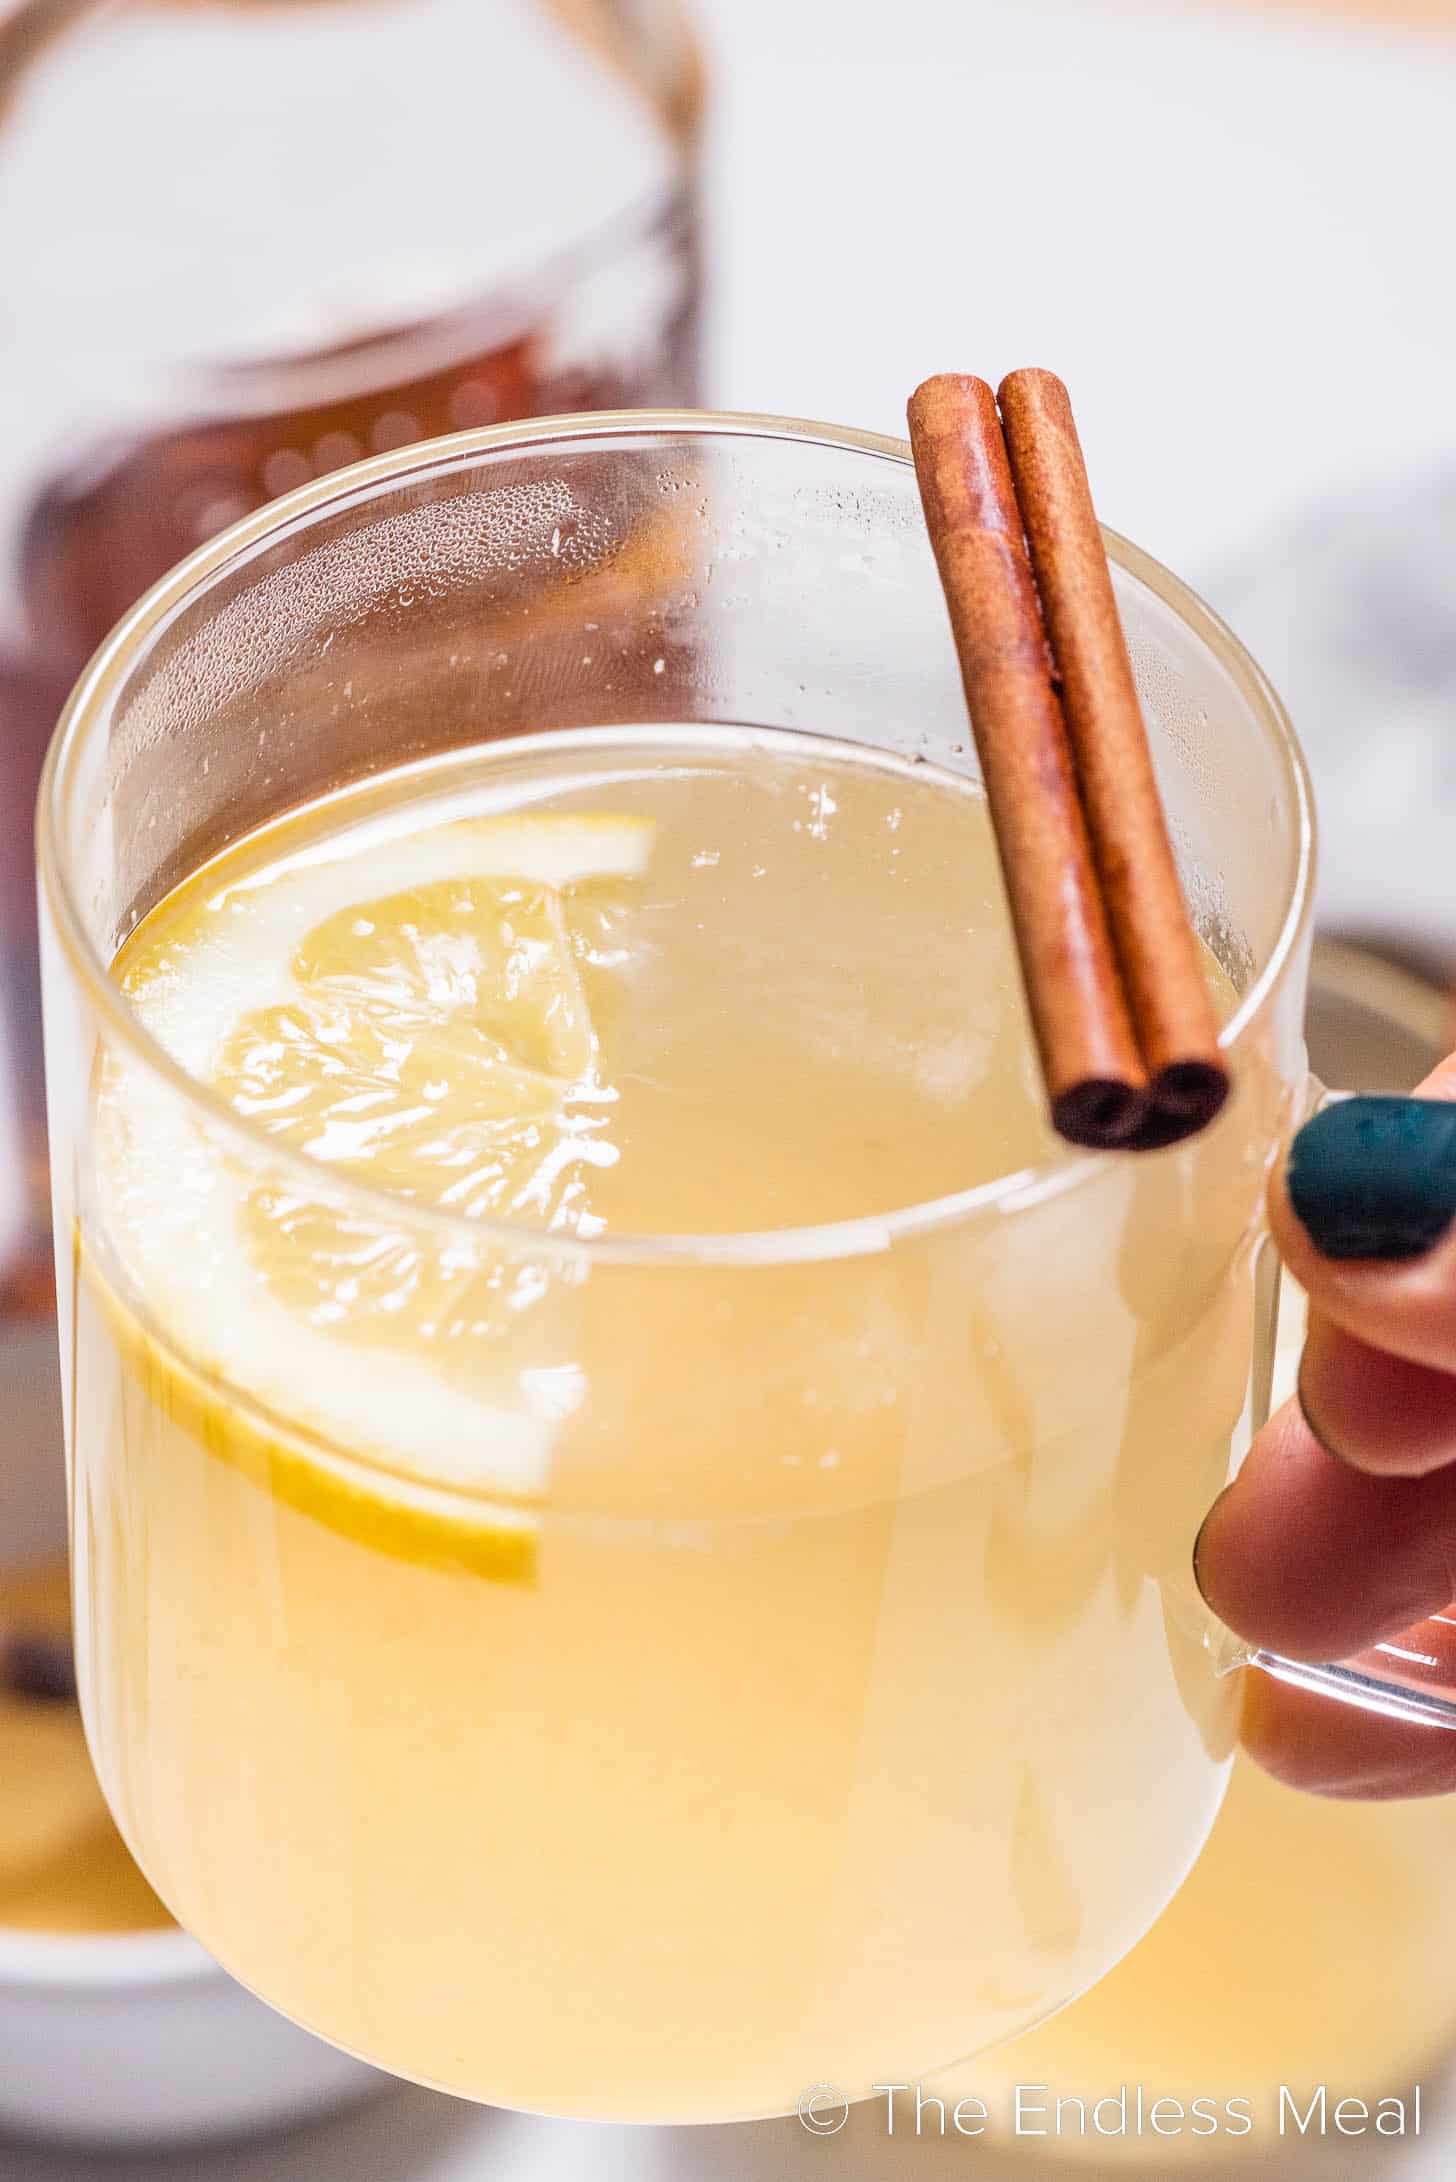 A hand holding a hot toddy.